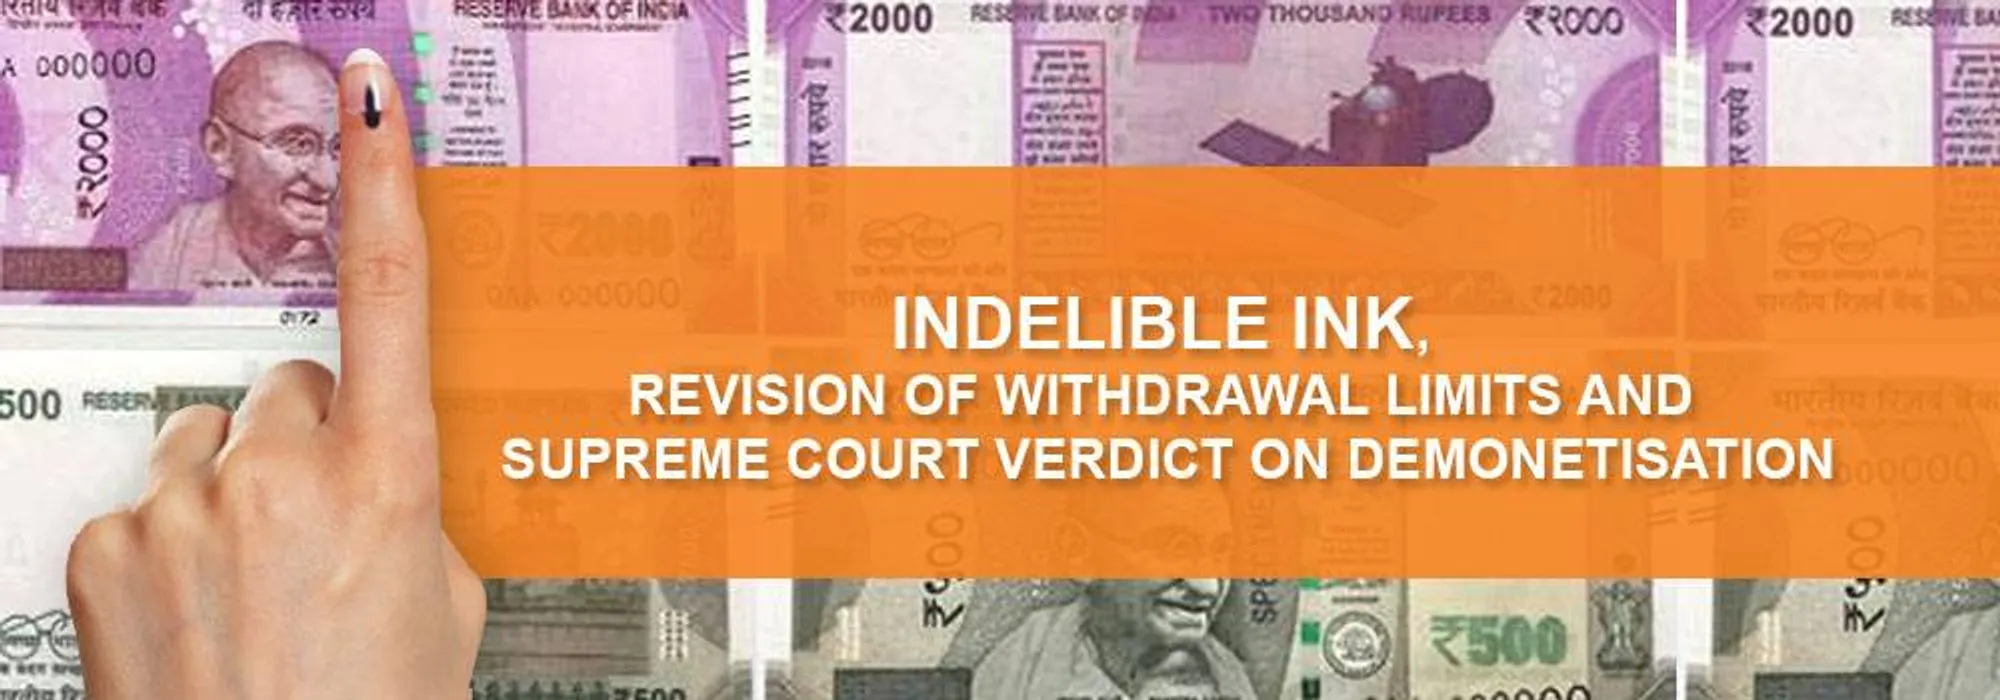 Indelible Ink, Revision of Withdrawal Limits and Supreme Court Verdict on Demonetisation